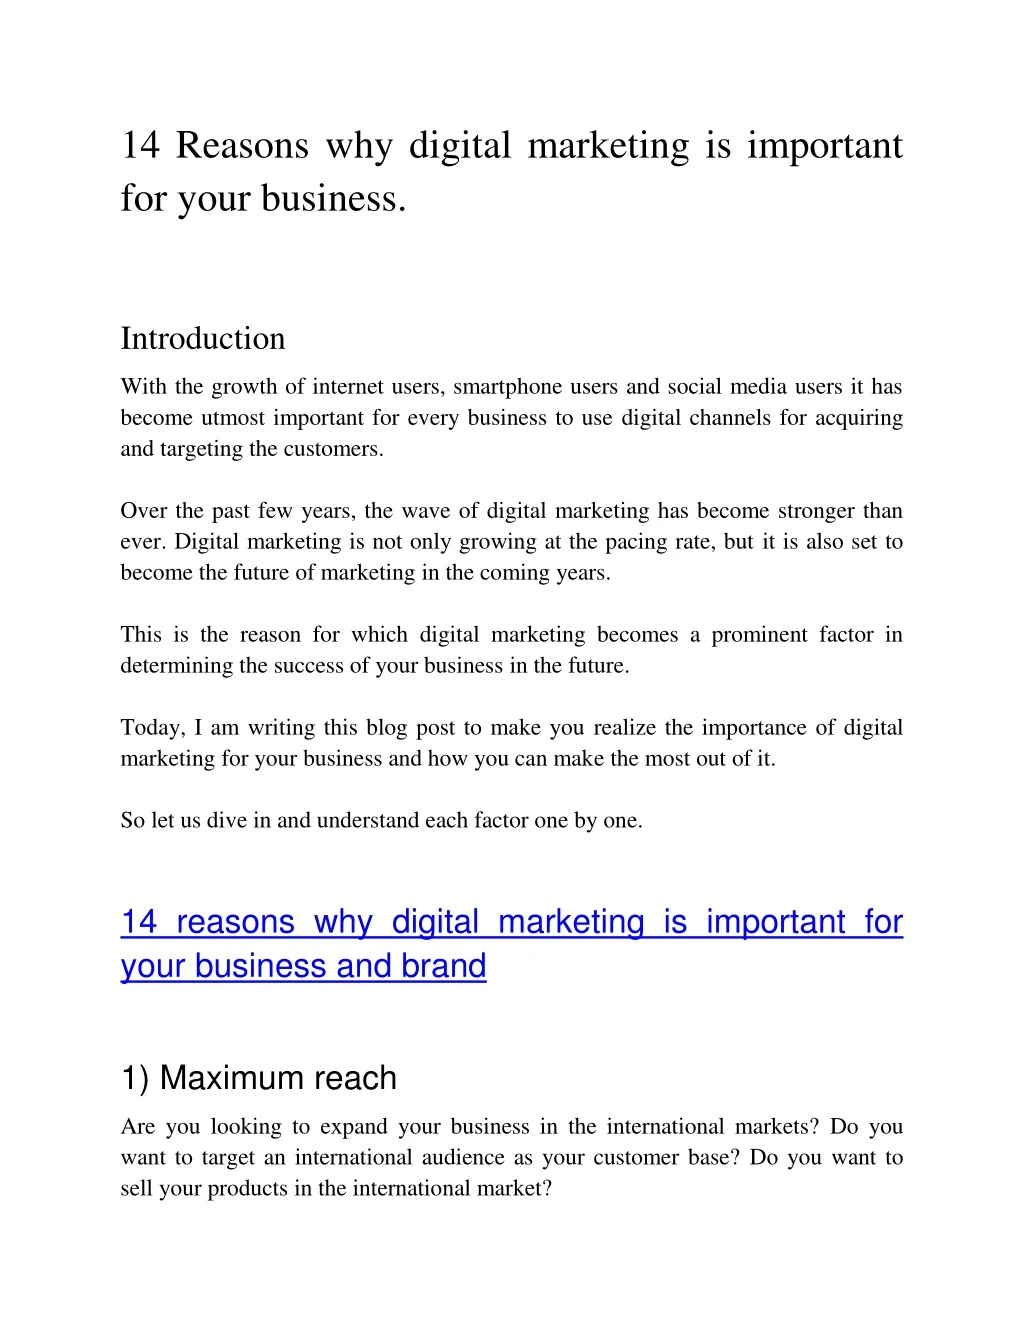 14 reasons why digital marketing is important